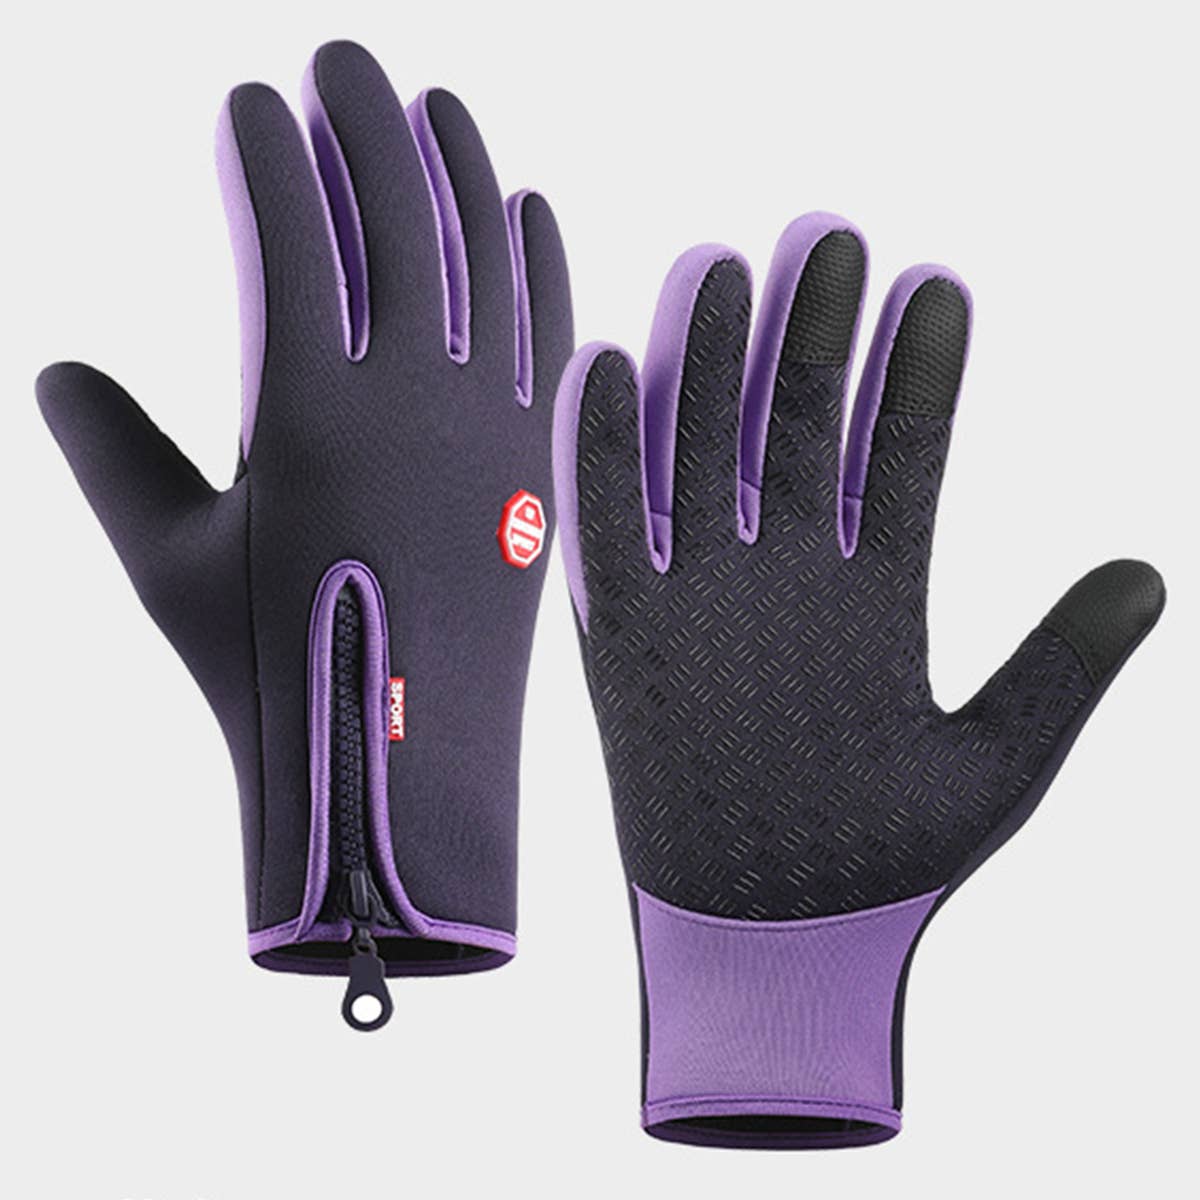 OUTDOOR CYCLING WATERPROOF SPORTS GLOVES_CWAG0042